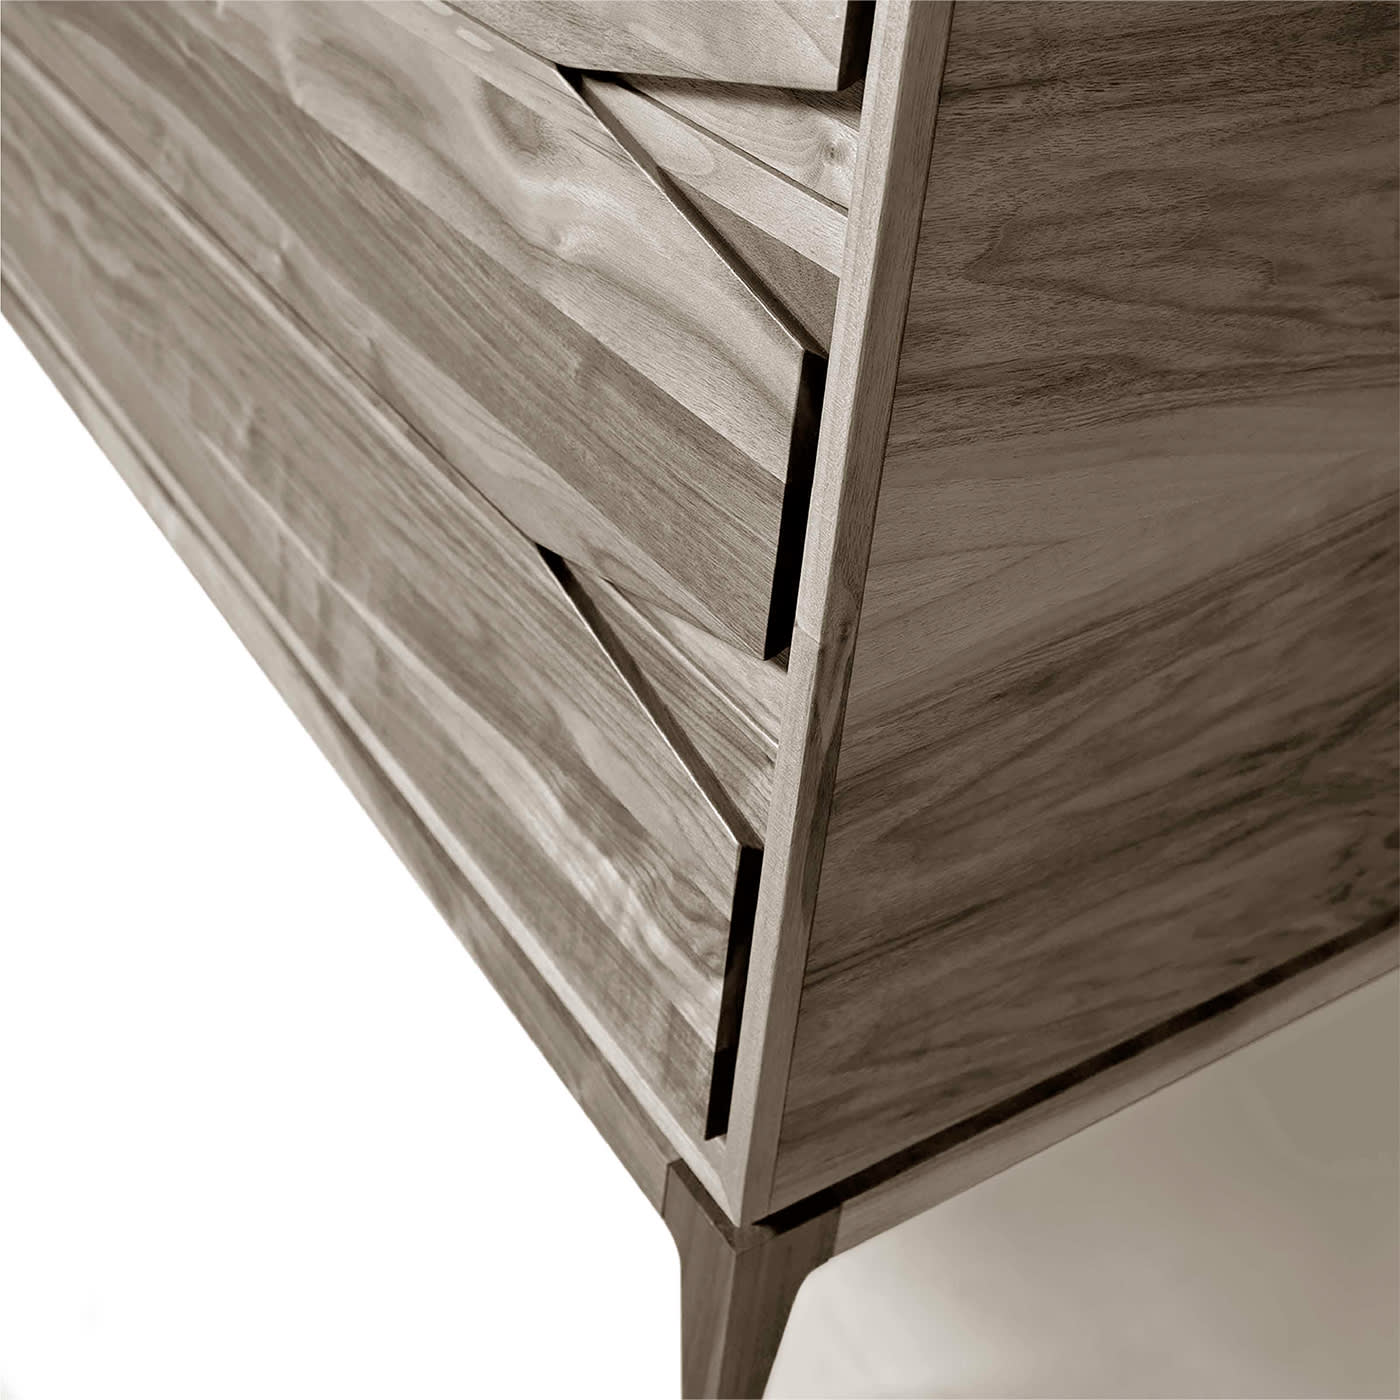 Base Chic Grey Chest Of Drawers